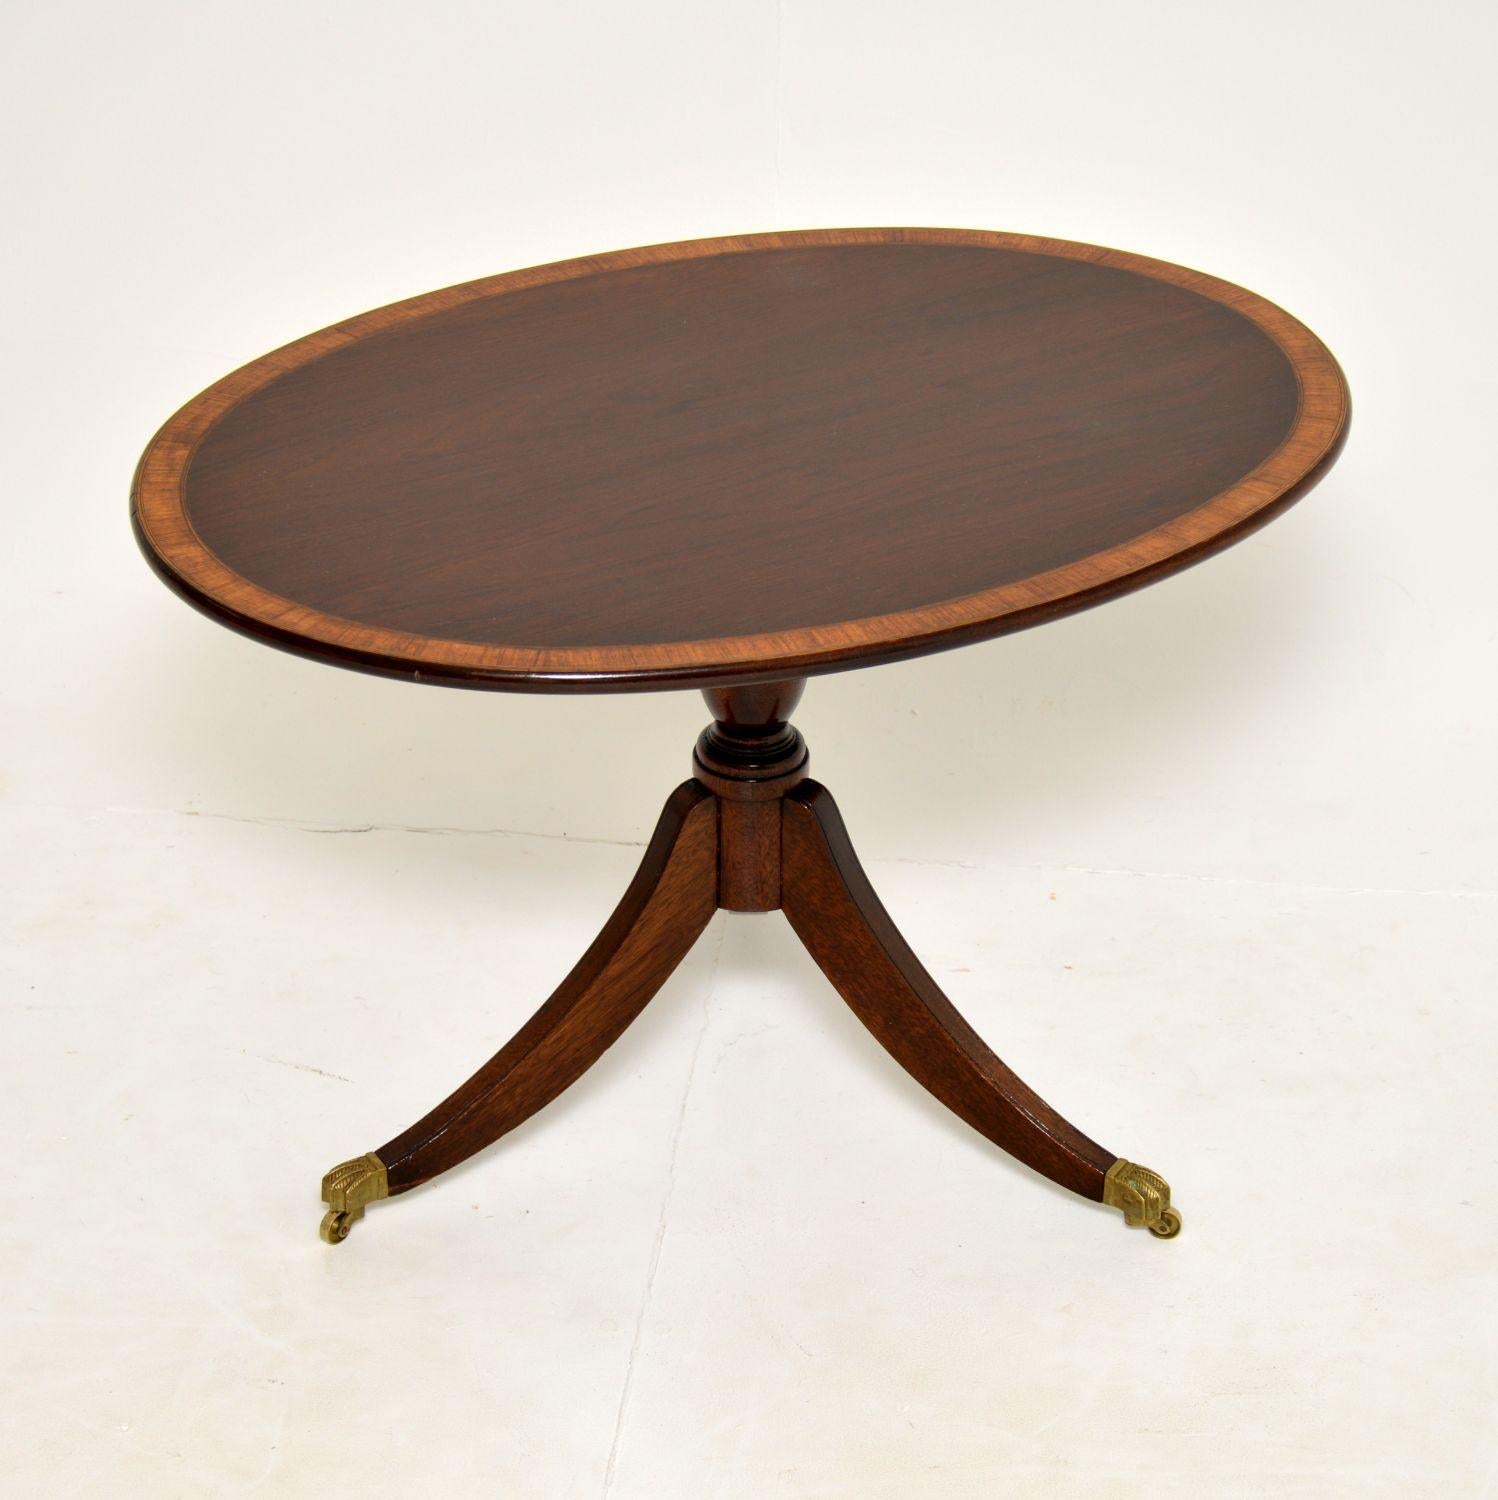 A beautiful and extremely well made oval tilt top coffee table in the antique Regency style. This was made in England, it dates from around the 1950-60’s.

The quality is amazing, this is made from wood with satin wood cross banding on the top.